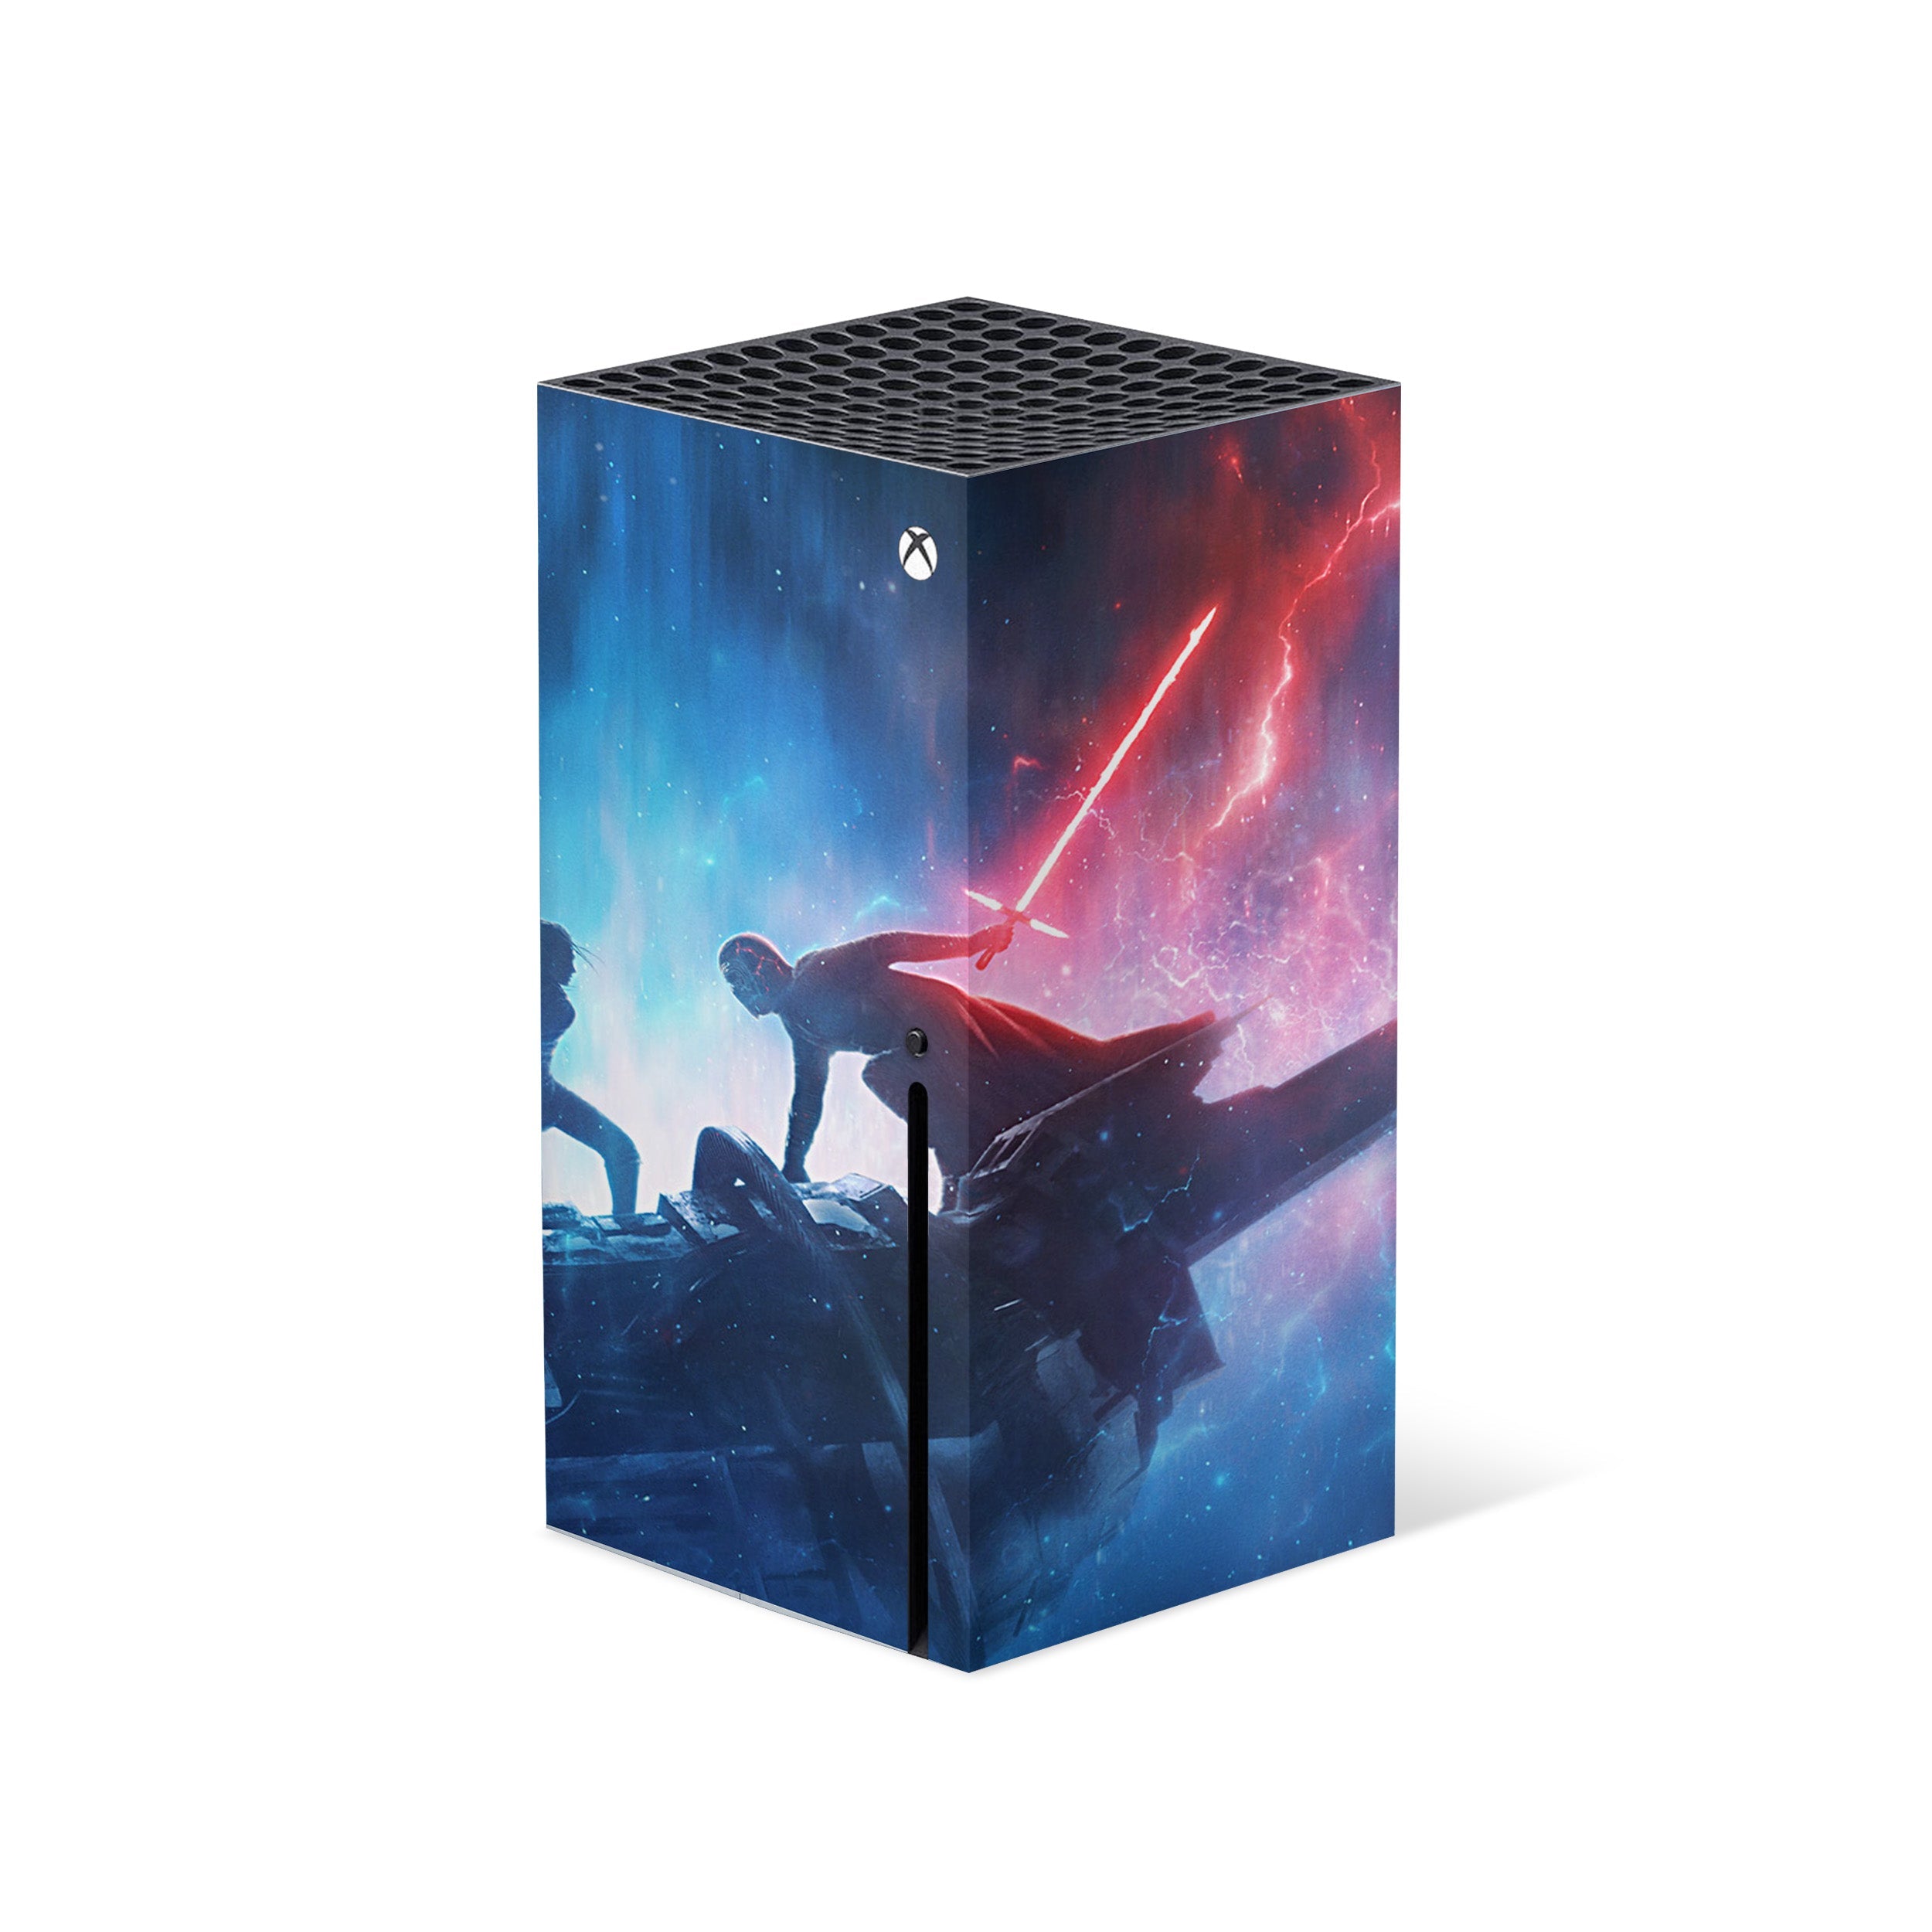 A video game skin featuring a Star Wars The Rise of Skywalker design for the Xbox Series X.